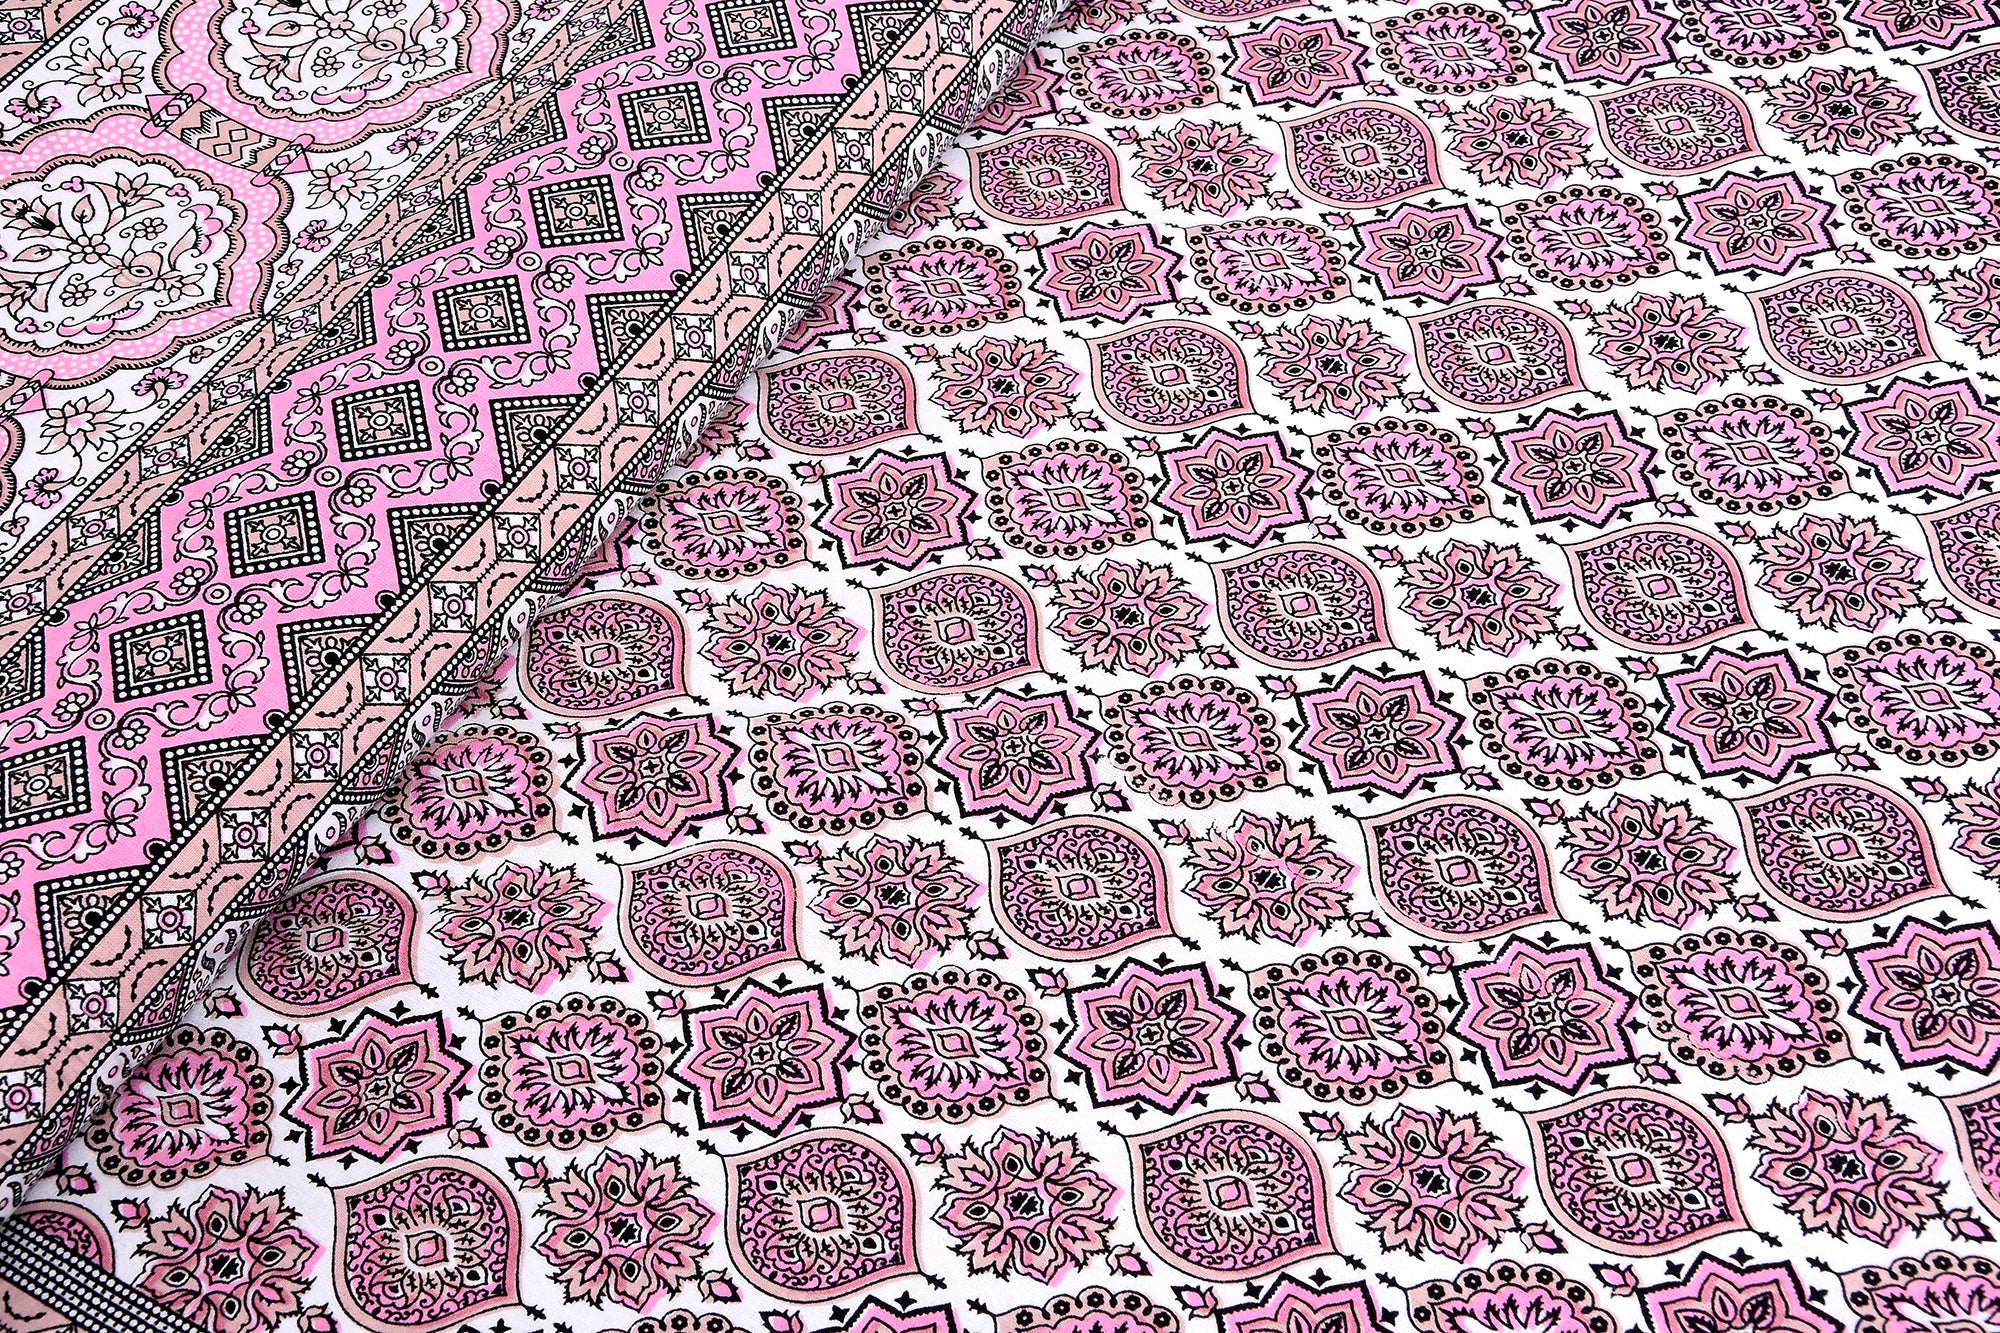 144 TC Pure Cotton Premium Ethnic Jaipuri Print Double Bed Bedsheet (90 In x 108 In) with 2 pillow cover - Pink 3